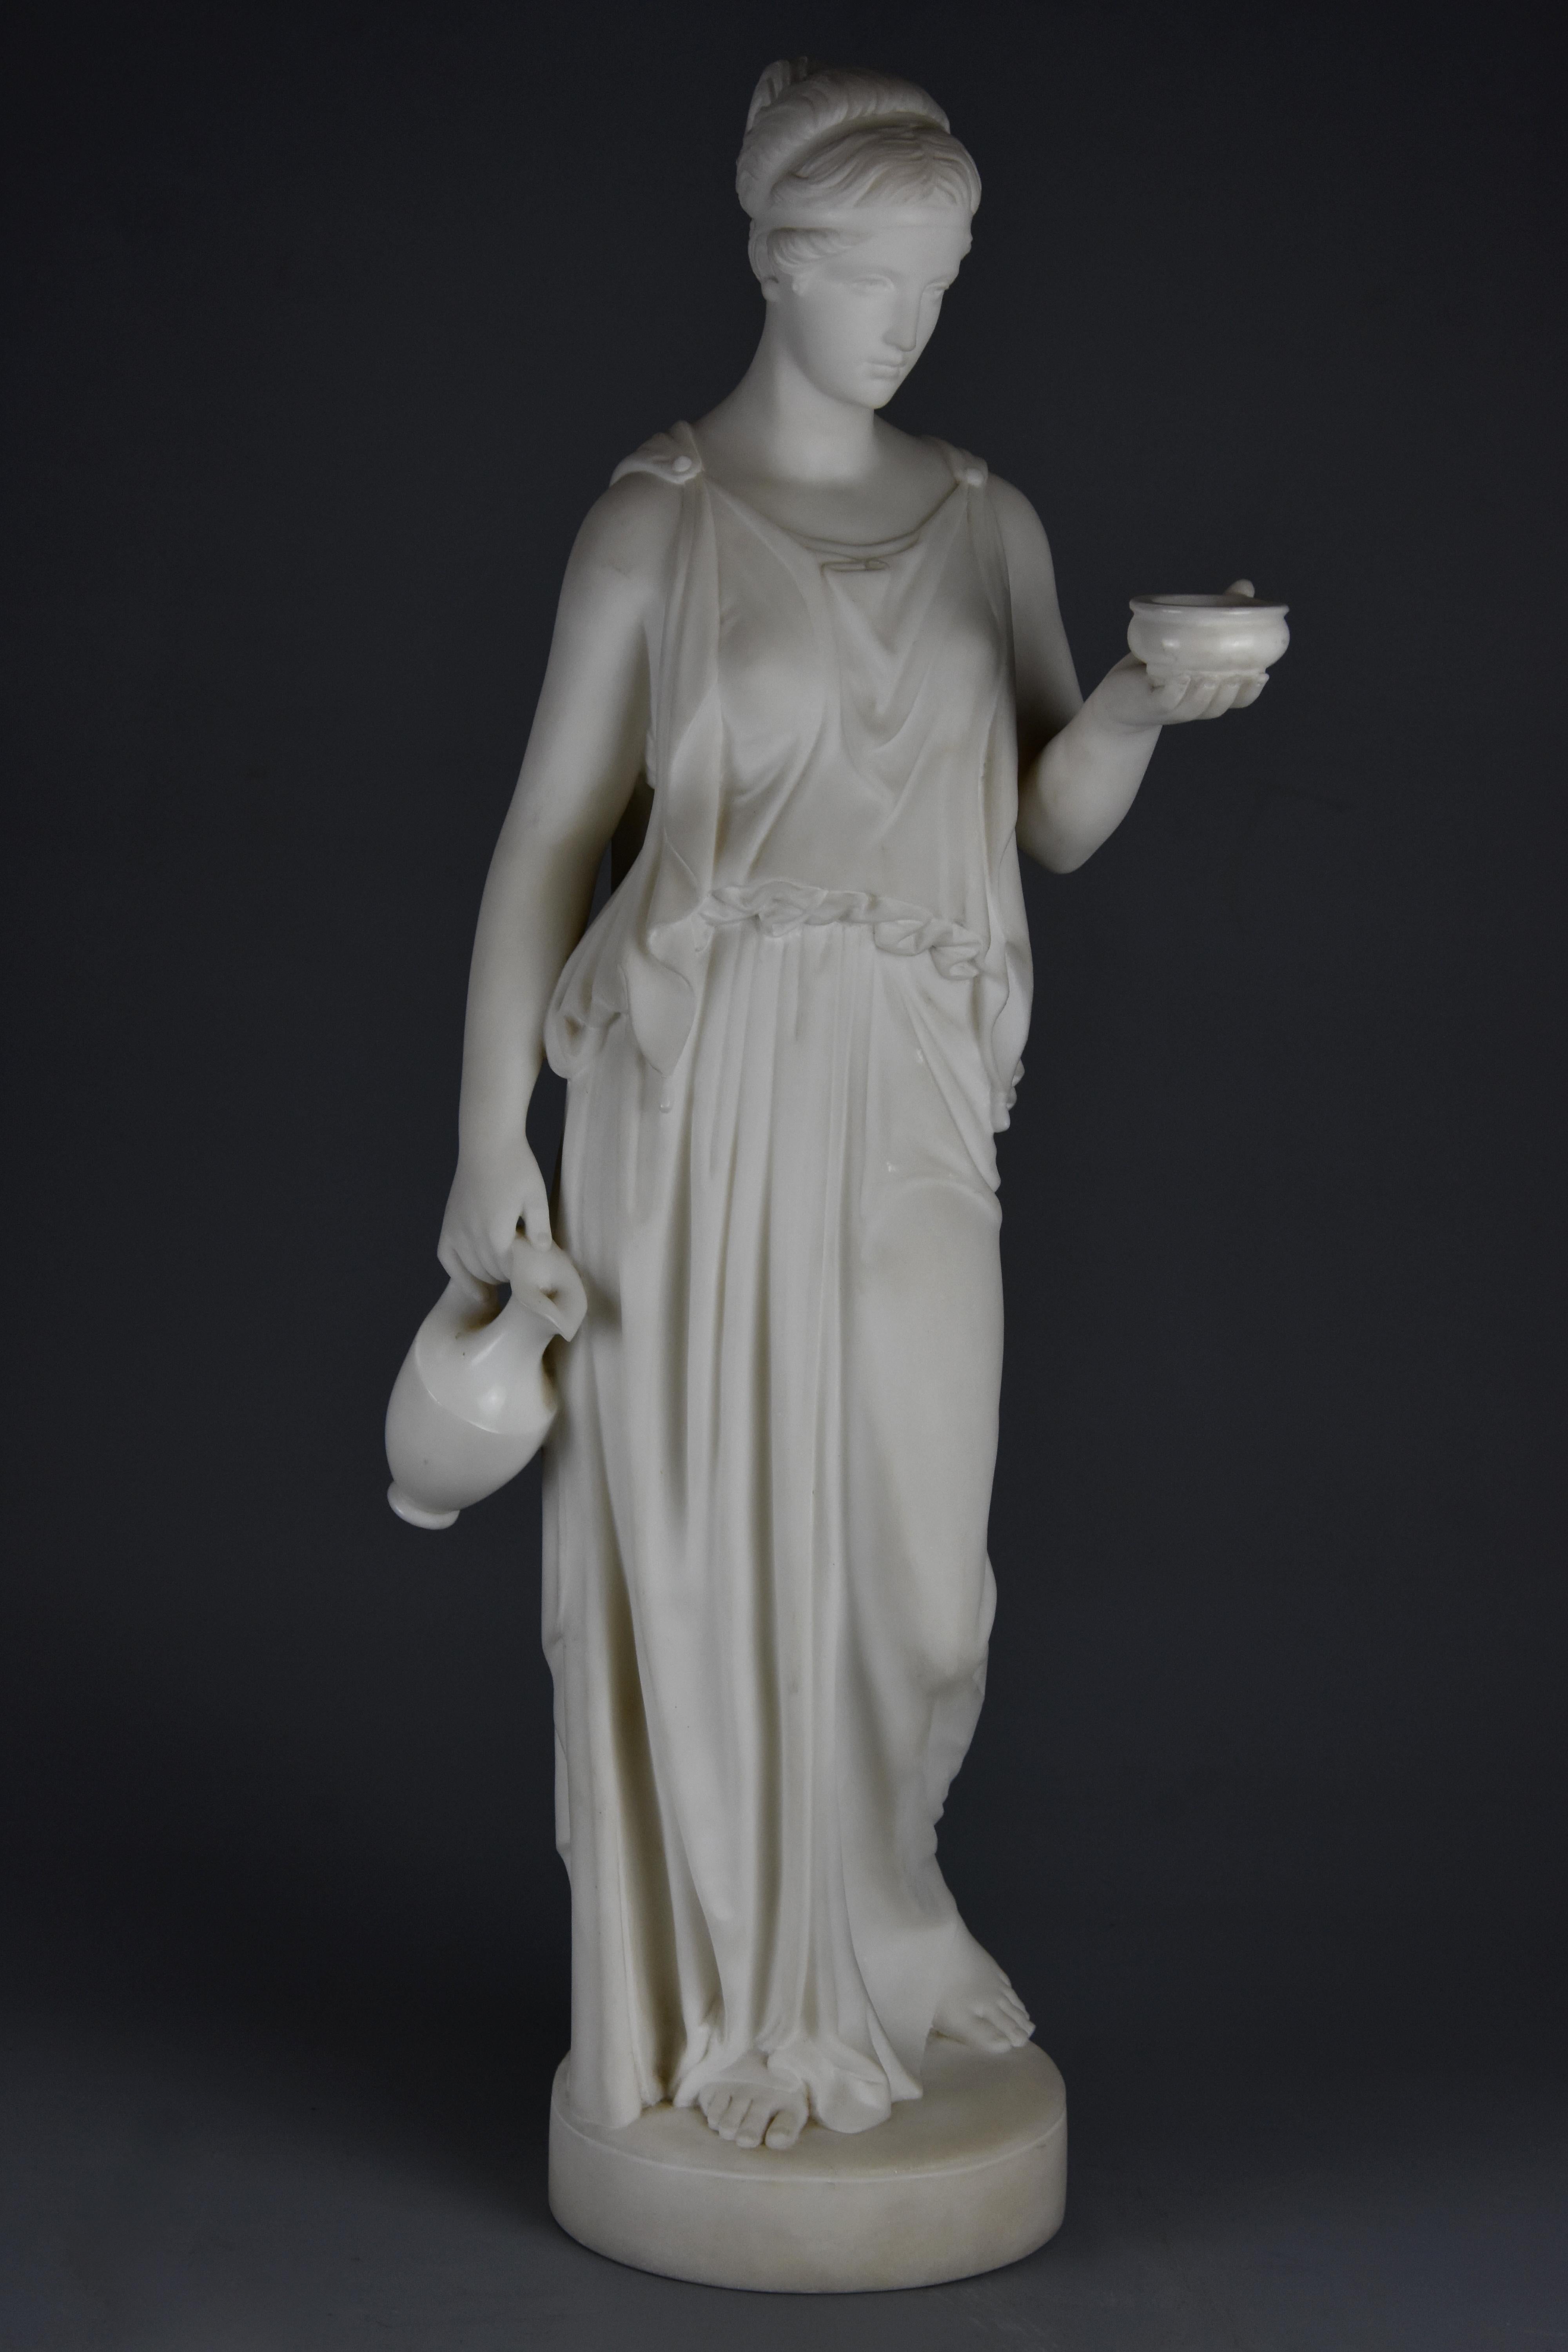 A fine quality mid-19th century carved marble figure of Hebe, goddess of youth after Bertel Thorvaldsen (1770-1844).

This sculpture depicts the fresh faced Hebe, who was said to have the gift of eternal youth, dressed in Classical draped chiton